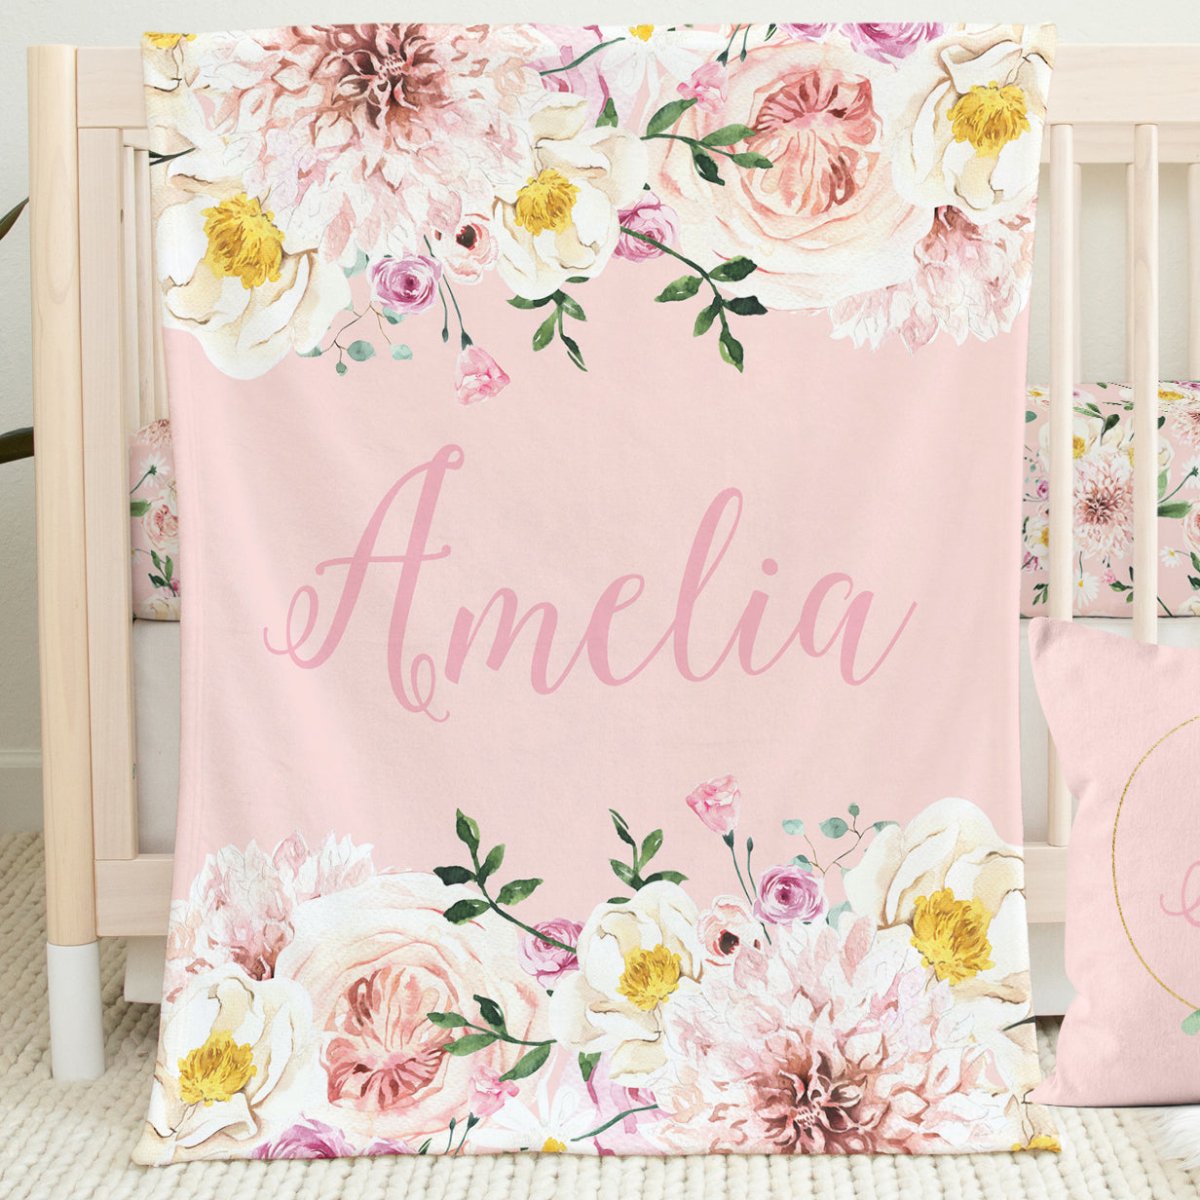 Farm Floral Personalized Minky Blanket - Farm Floral, gender_girl, Personalized_Yes